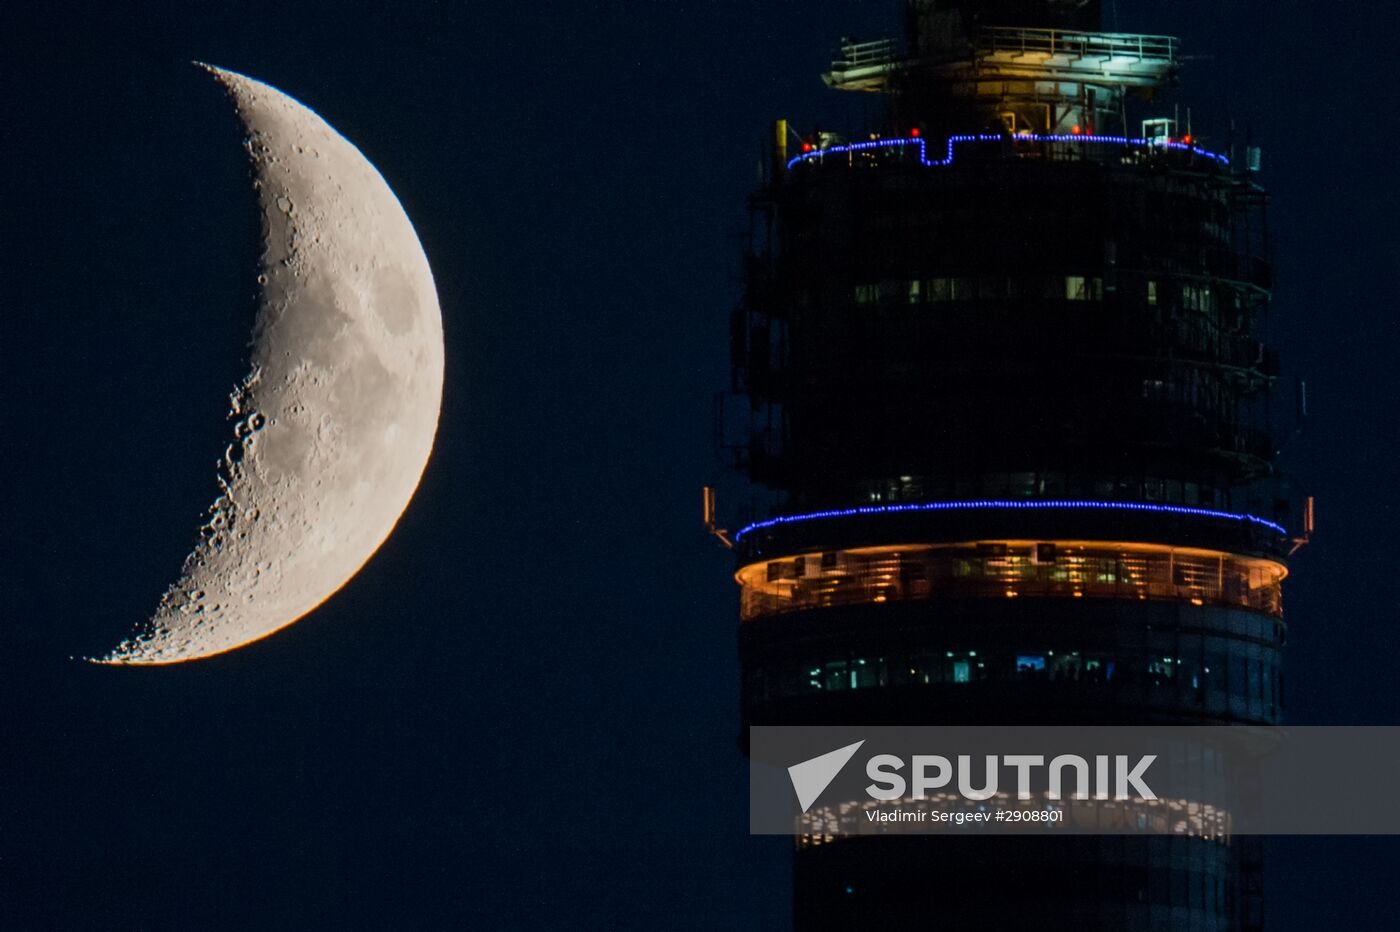 Ostankino TV Tower observation deck and waxing moon in Moscow